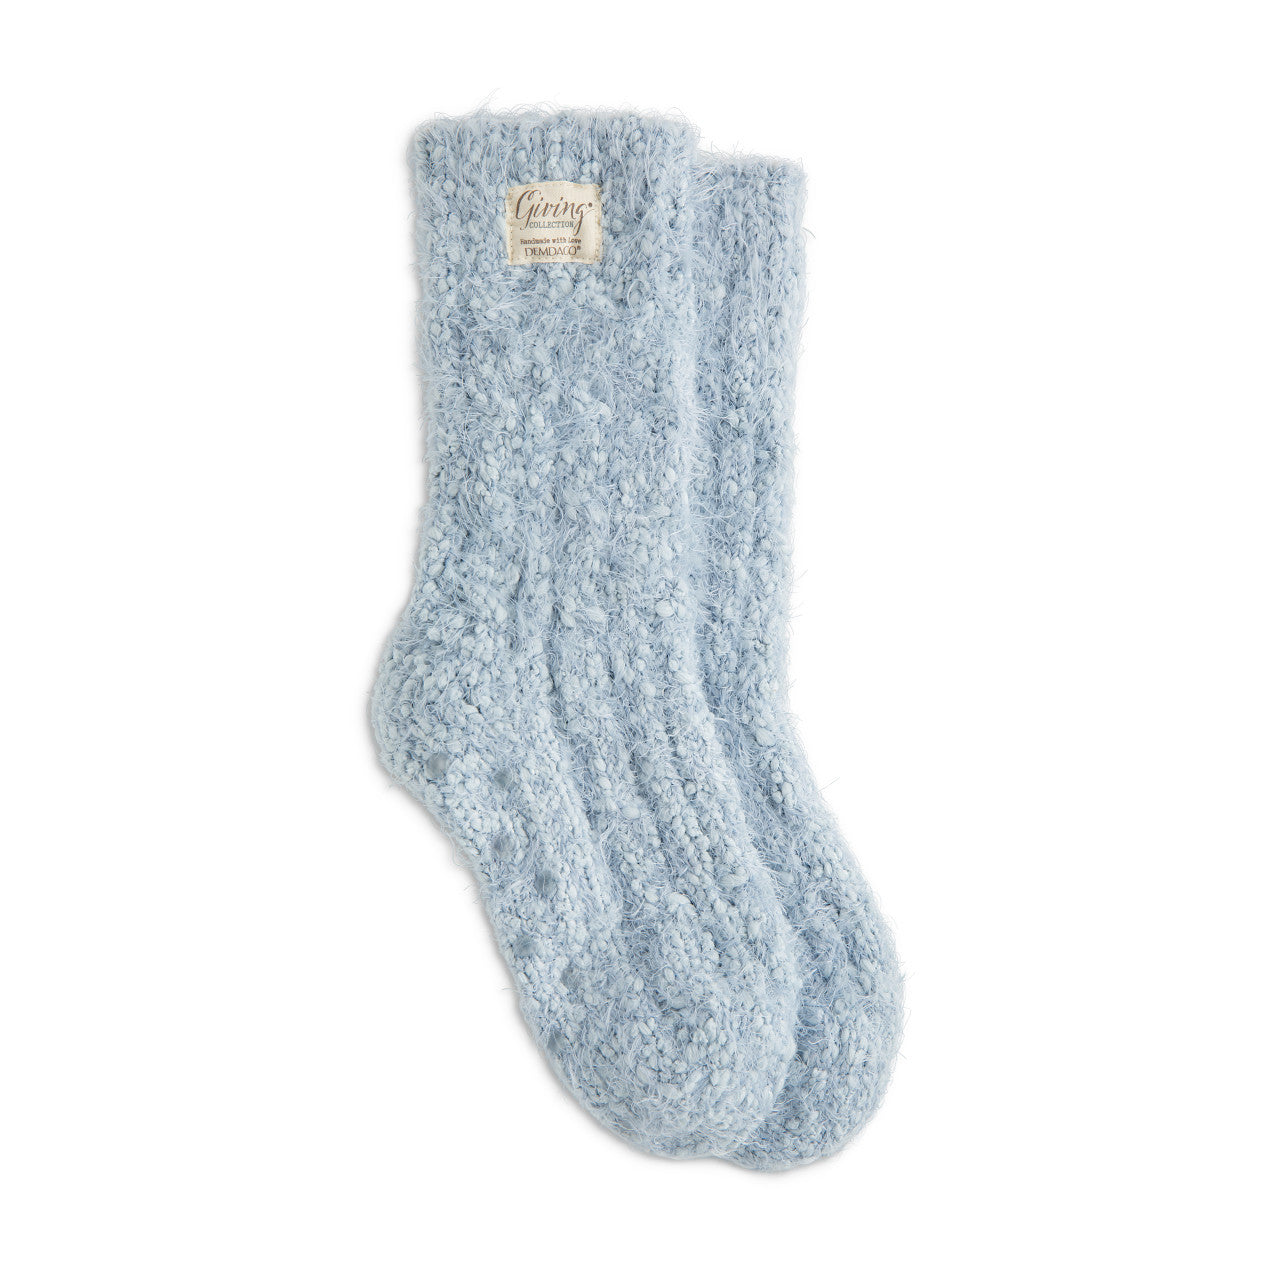 Demdaco Giving Socks - Soft Blue available at The Good Life Boutique